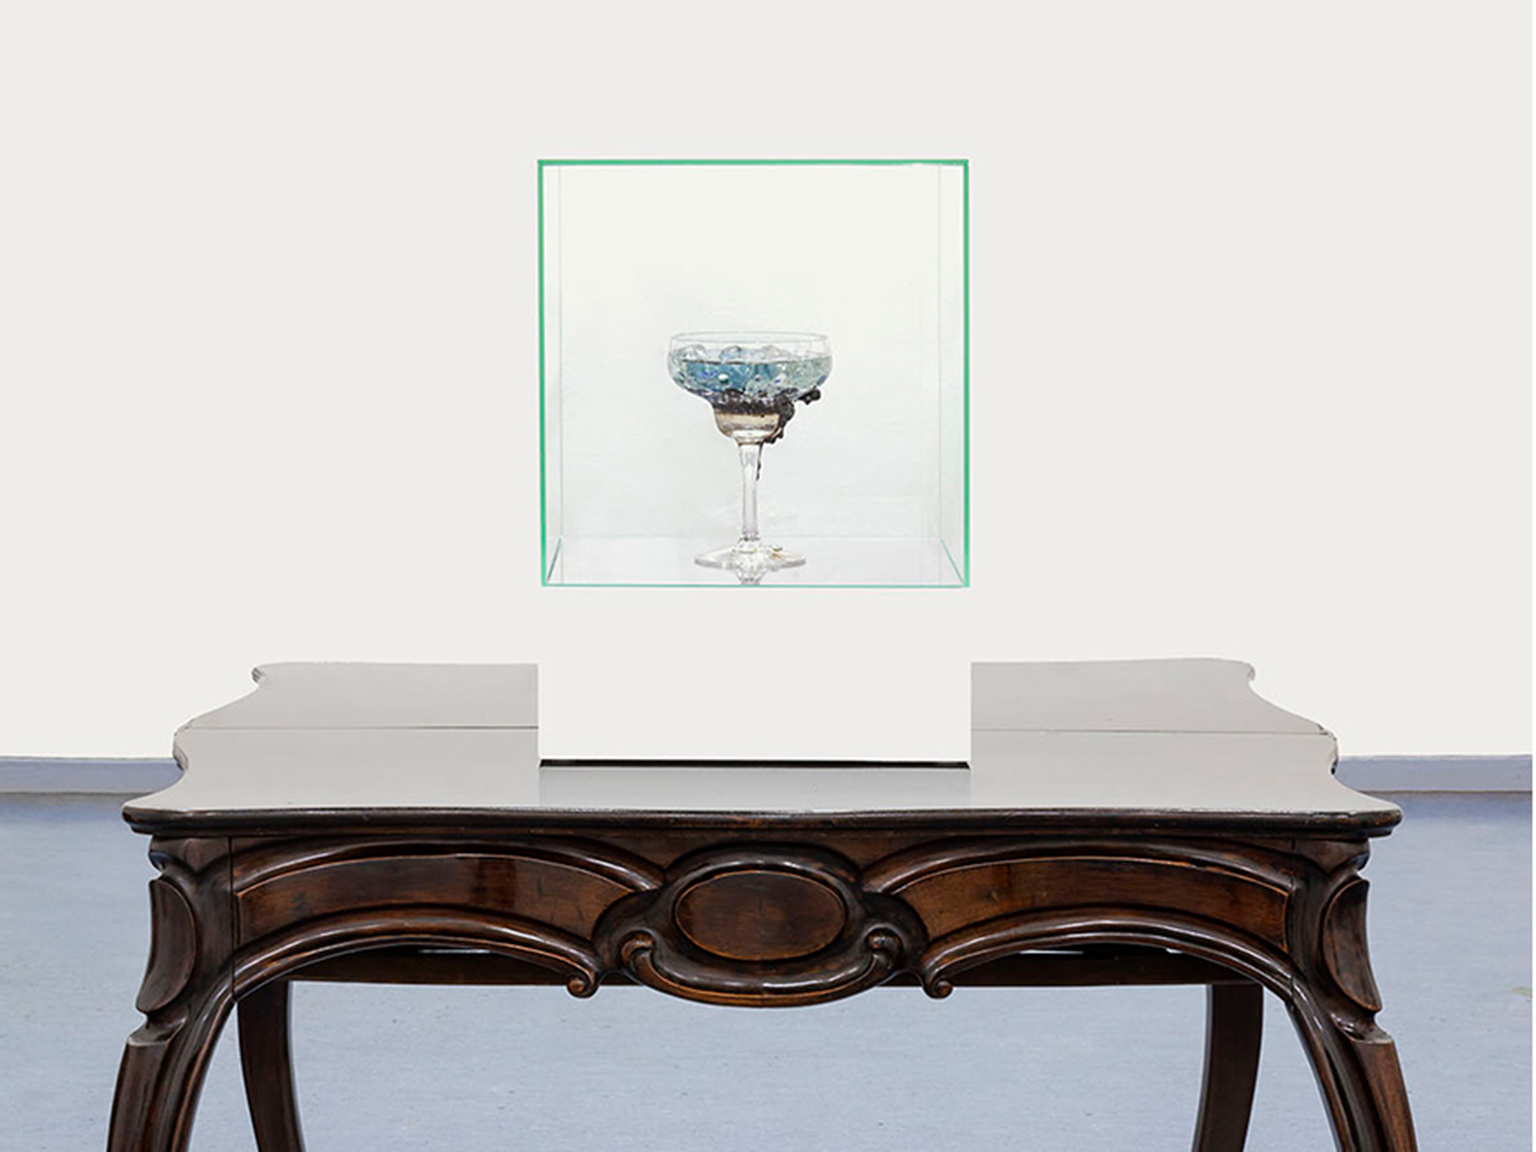 Ane Graff, The Goblets (Alzheimer's Disease), 2019. 42 × 30 × 30 cm.
Glass goblet containing: mercury, silver, tin, zinc, copper (from dental amalgam); Arsenic, cadmium, lead, silica dust and polycyclic aromatic hydrocarbons (from Marlboro cigarettes); Clonazepam (from Klonopin Oral Tablets anti-anxiety medication); polycyclic organic hydrocarbons, organophosphate flame-retardants, phthalates, benzothiazoles, musk compounds, plasticisers, magnetite and silica dust (from road and tunnel dust); aluminium zirconium tetrachlorohydrex Gly, cyclopentasiloxane, ppg-14 butyl ether, phthalates (from Dove Sensitive antiperspirant stick); maltitol, sorbitol, xylitol, steviol glycosides, ammonium salt, gum arabic, glycyrrhizin, E153, gum arabic (from sugar free salt liquorish pastilles); diacetyl, perfluorooctanoic acid, tertiary-butyl hydroquinone, trans fats (from microwave popcorn); saccharomyces cerevisiae yeast, mold, gluten, hardened rapeseed oil (from molded white bread); potassium aluminum sulfate (from deodorant); glucose fructose, syrup, glycerol, E133, corn syrup, starch, E420, salt, sugar (from blue icing color); calcium silicate, sodium (from table salt); inorganic copper powders, aluminum salts, and crushed glass in epoxy laminating resin mix. Photo: RH Studio.